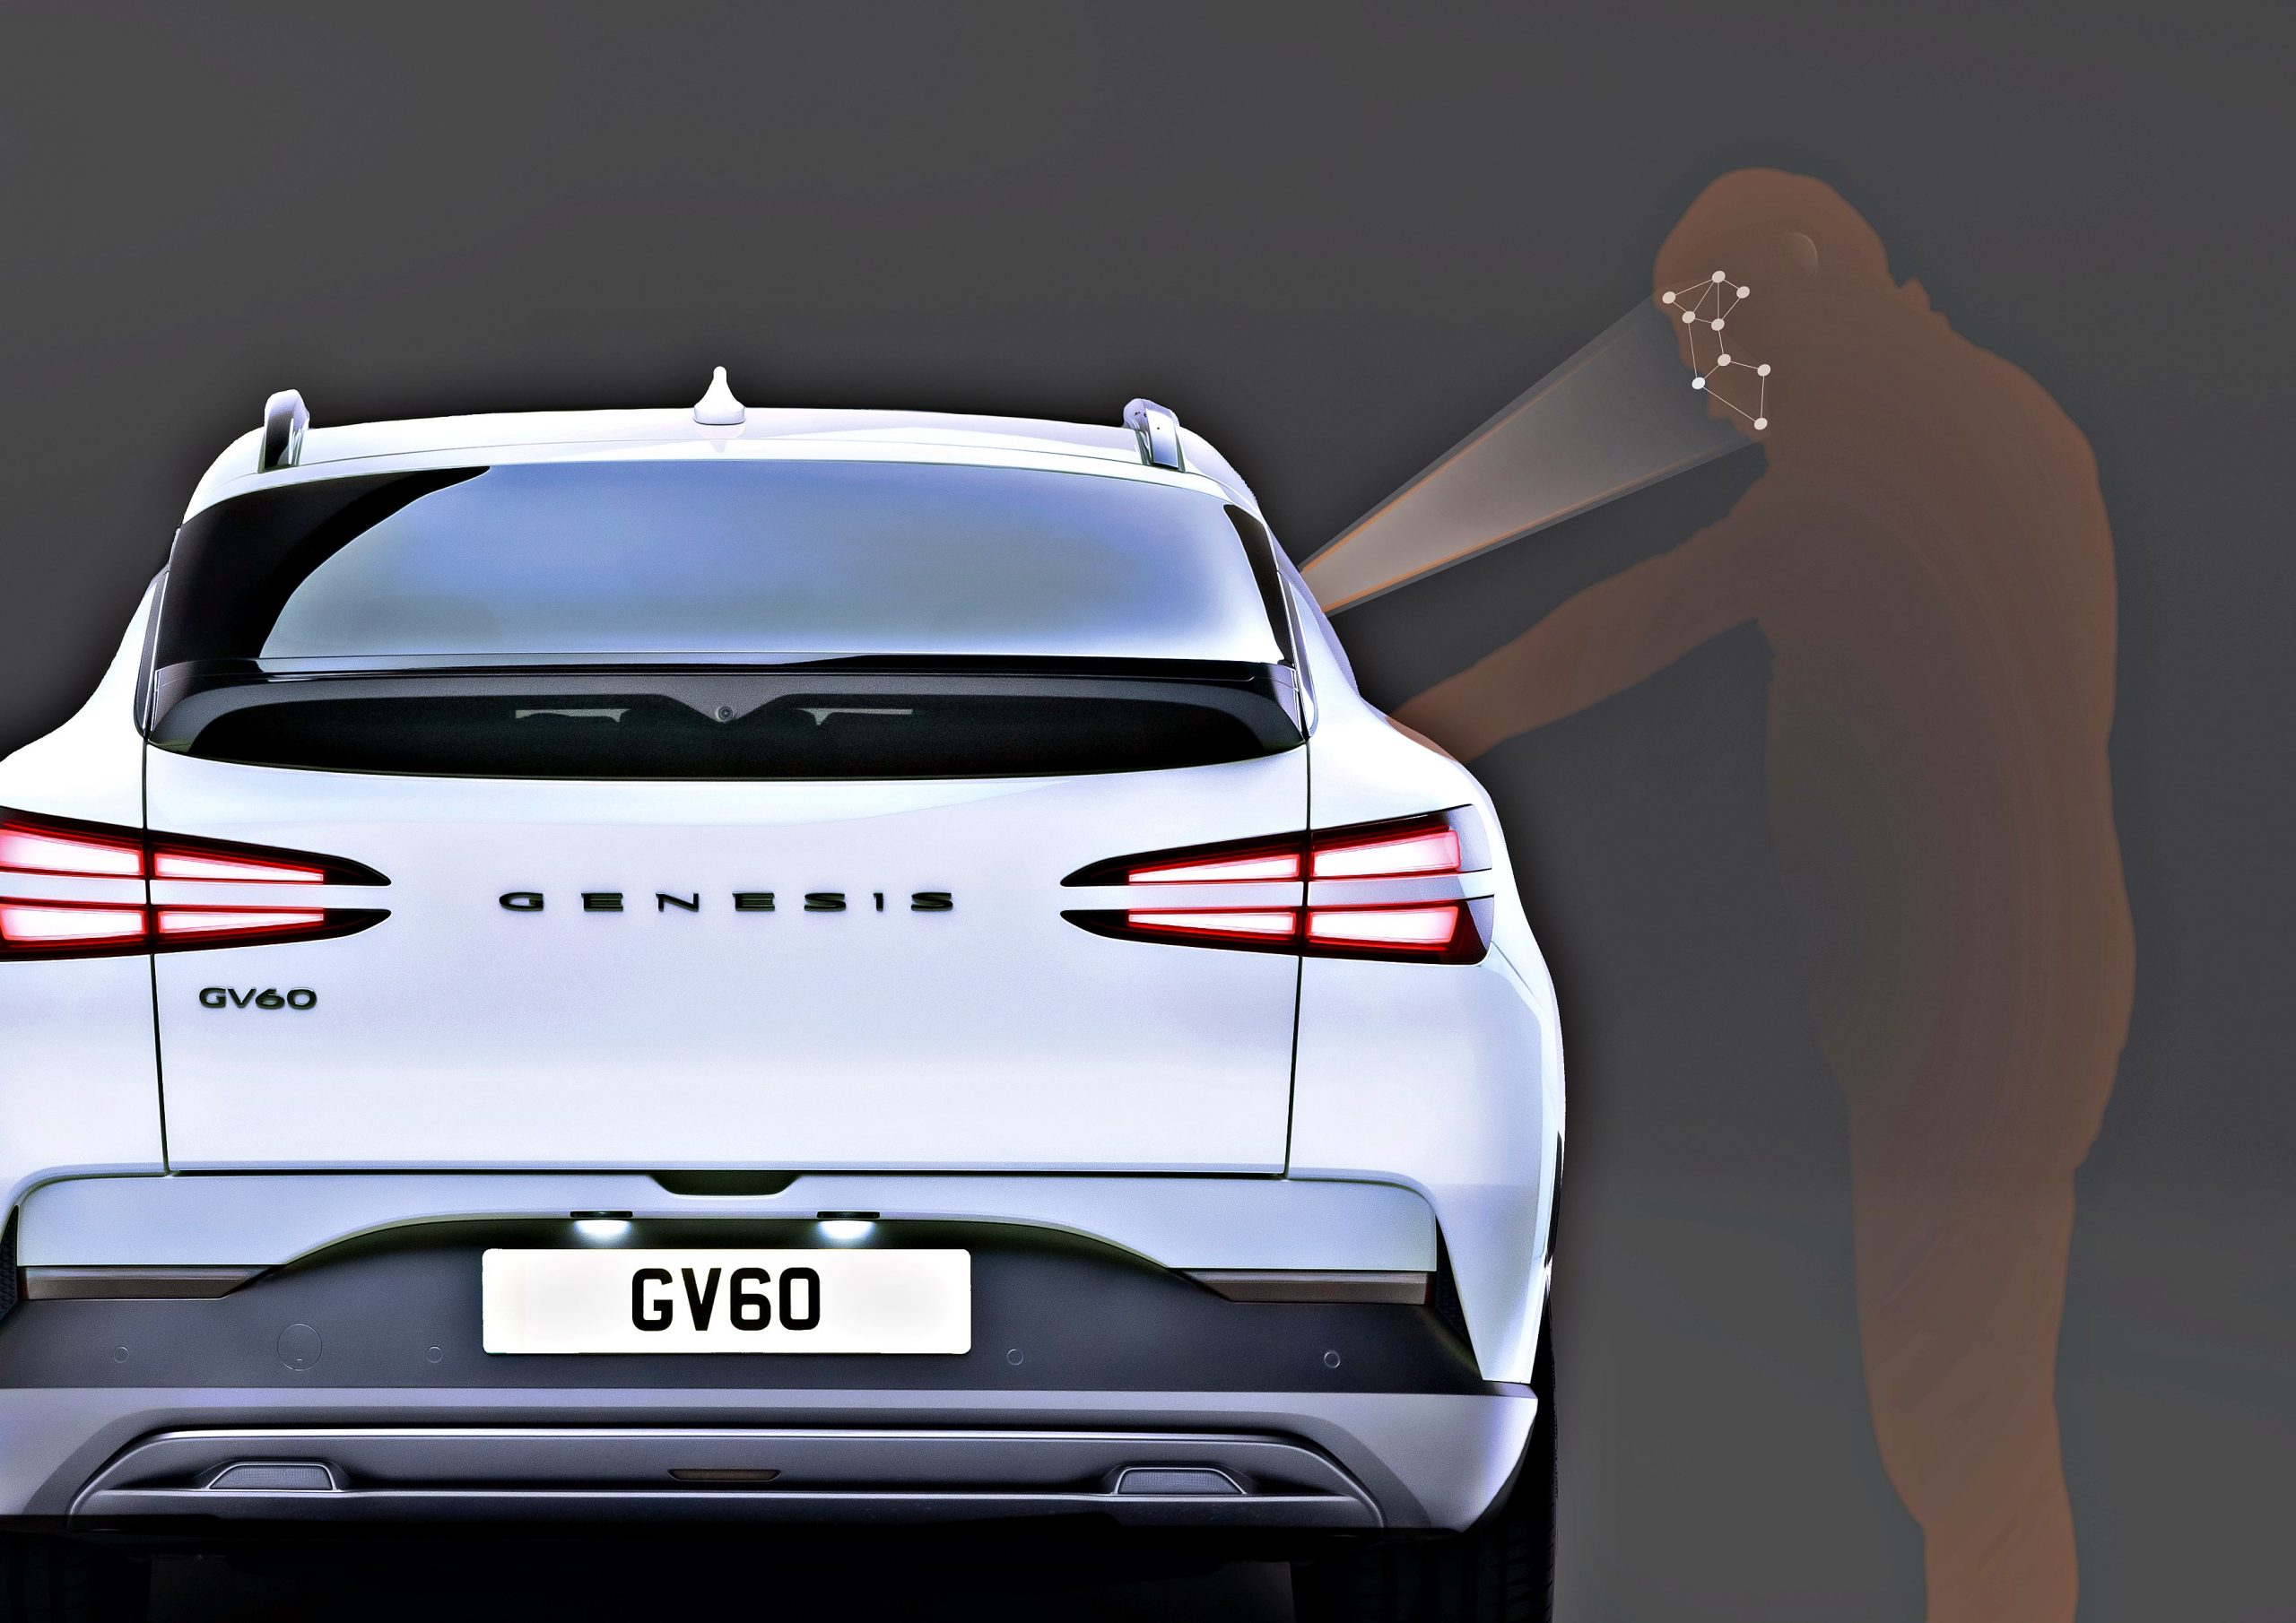 genesis gv60 uses facial recognition technology for unlocking doors